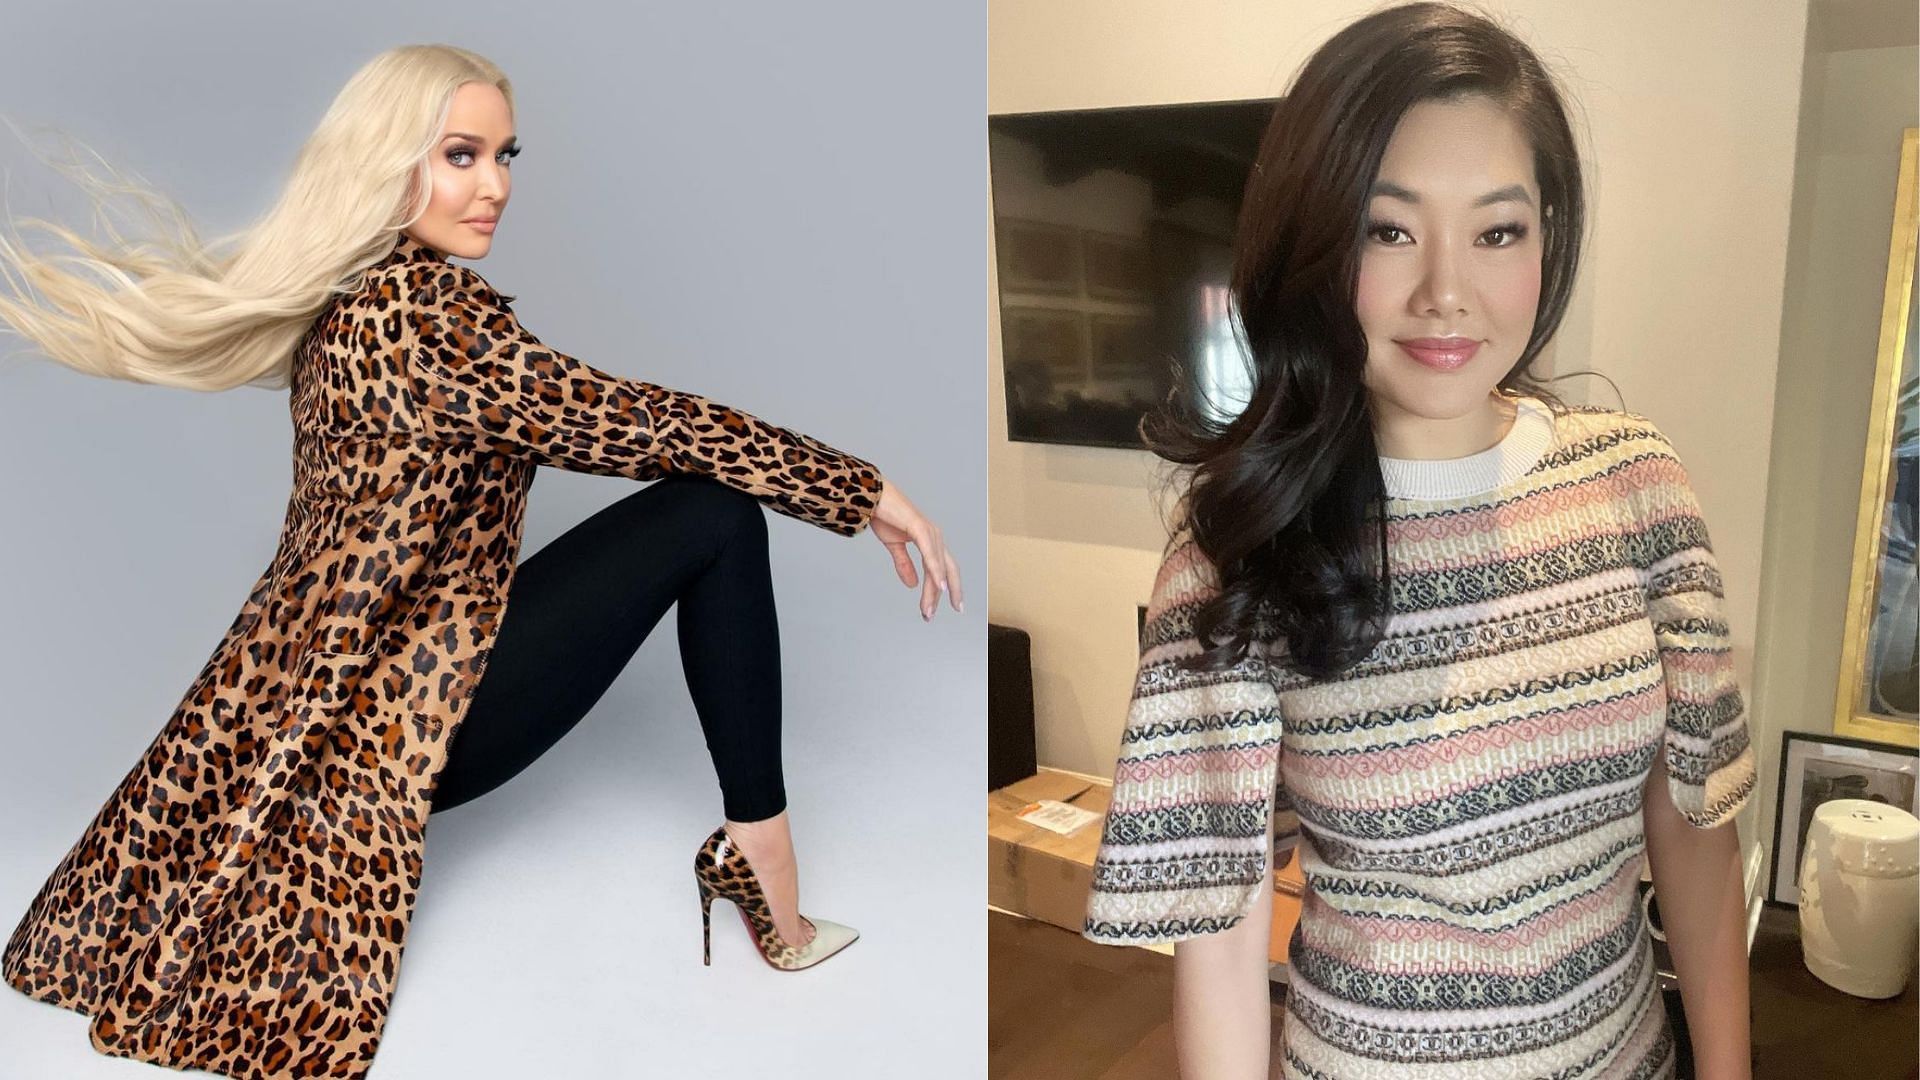 Erika Jayne addresses her &ldquo;laxative&rdquo; comment on Crystal Kung Minkoff&rsquo;s ED (Image via @theprettymess and @crystalkungminkoff/Instagarm)